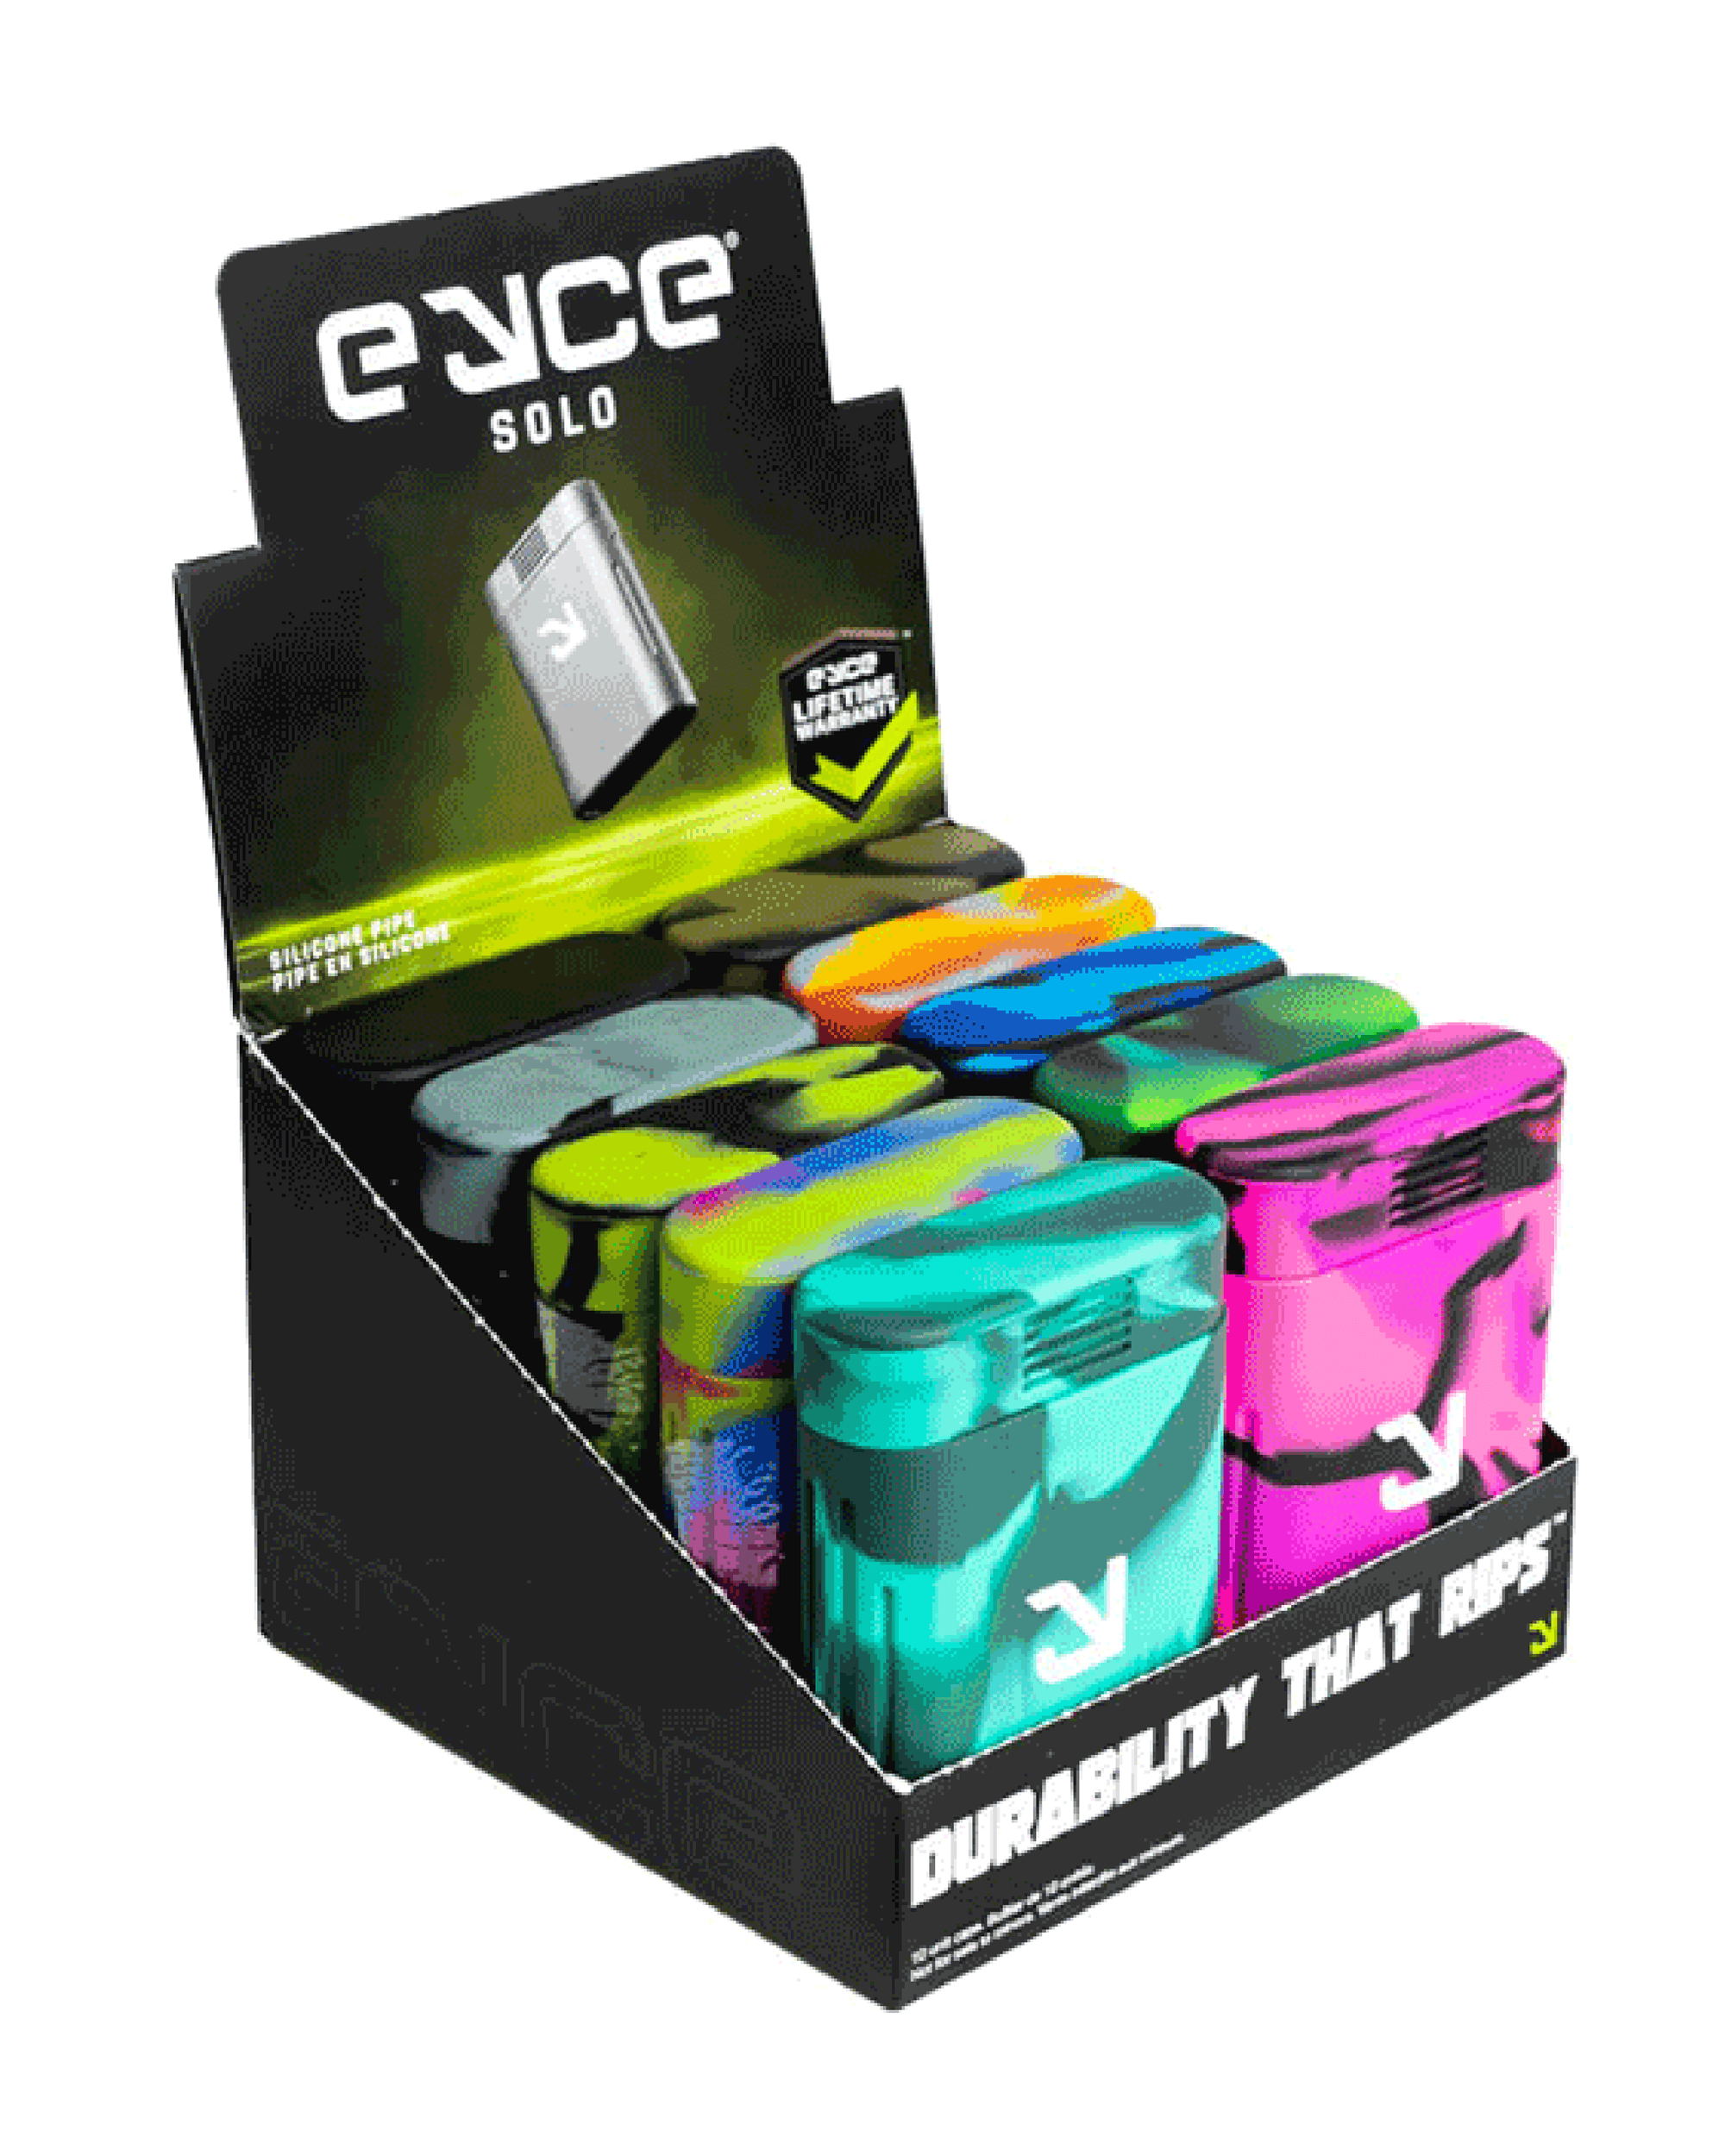 Eyce | 'Retail Display' Platinum-Cured Silicone Solo Dugout | 82mm - Assorted - 10 Count - 1